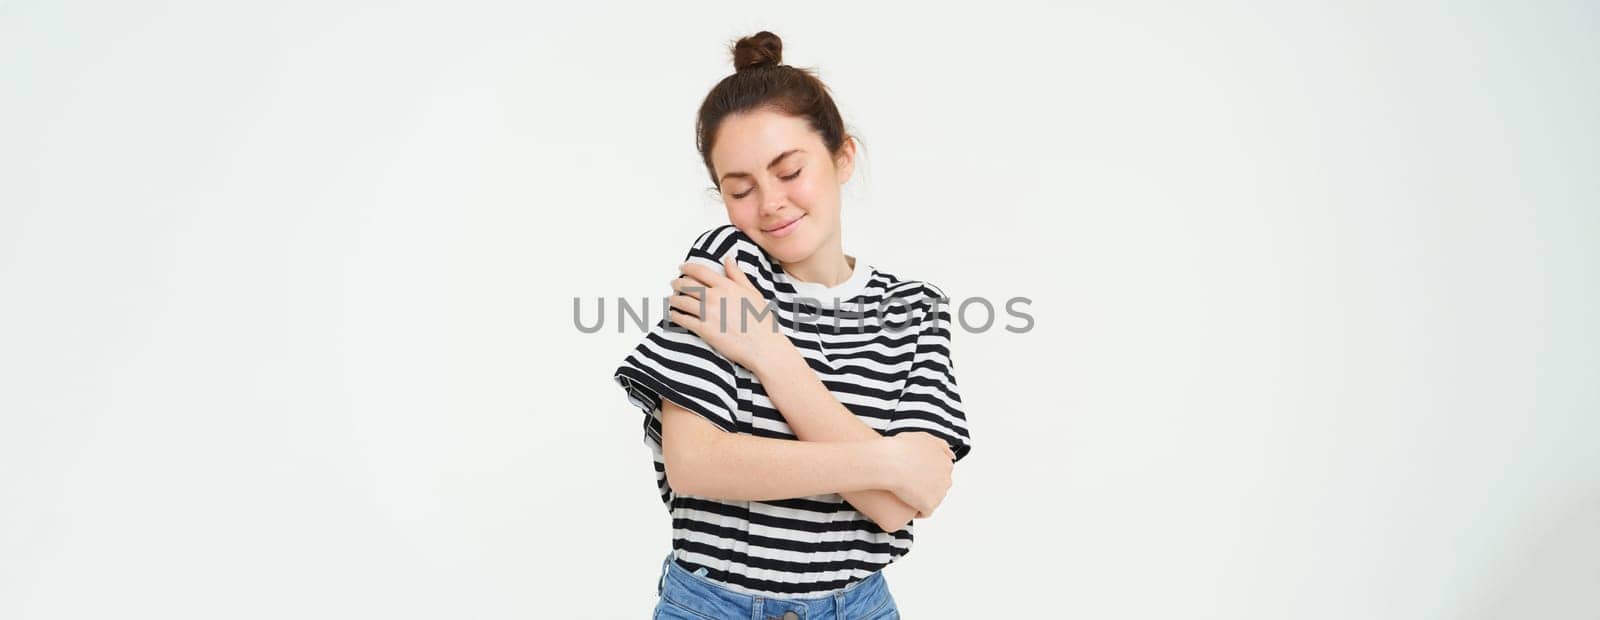 self-care and love. Young beautiful woman hugs herself, embraces own body and smiles, stands over white background.